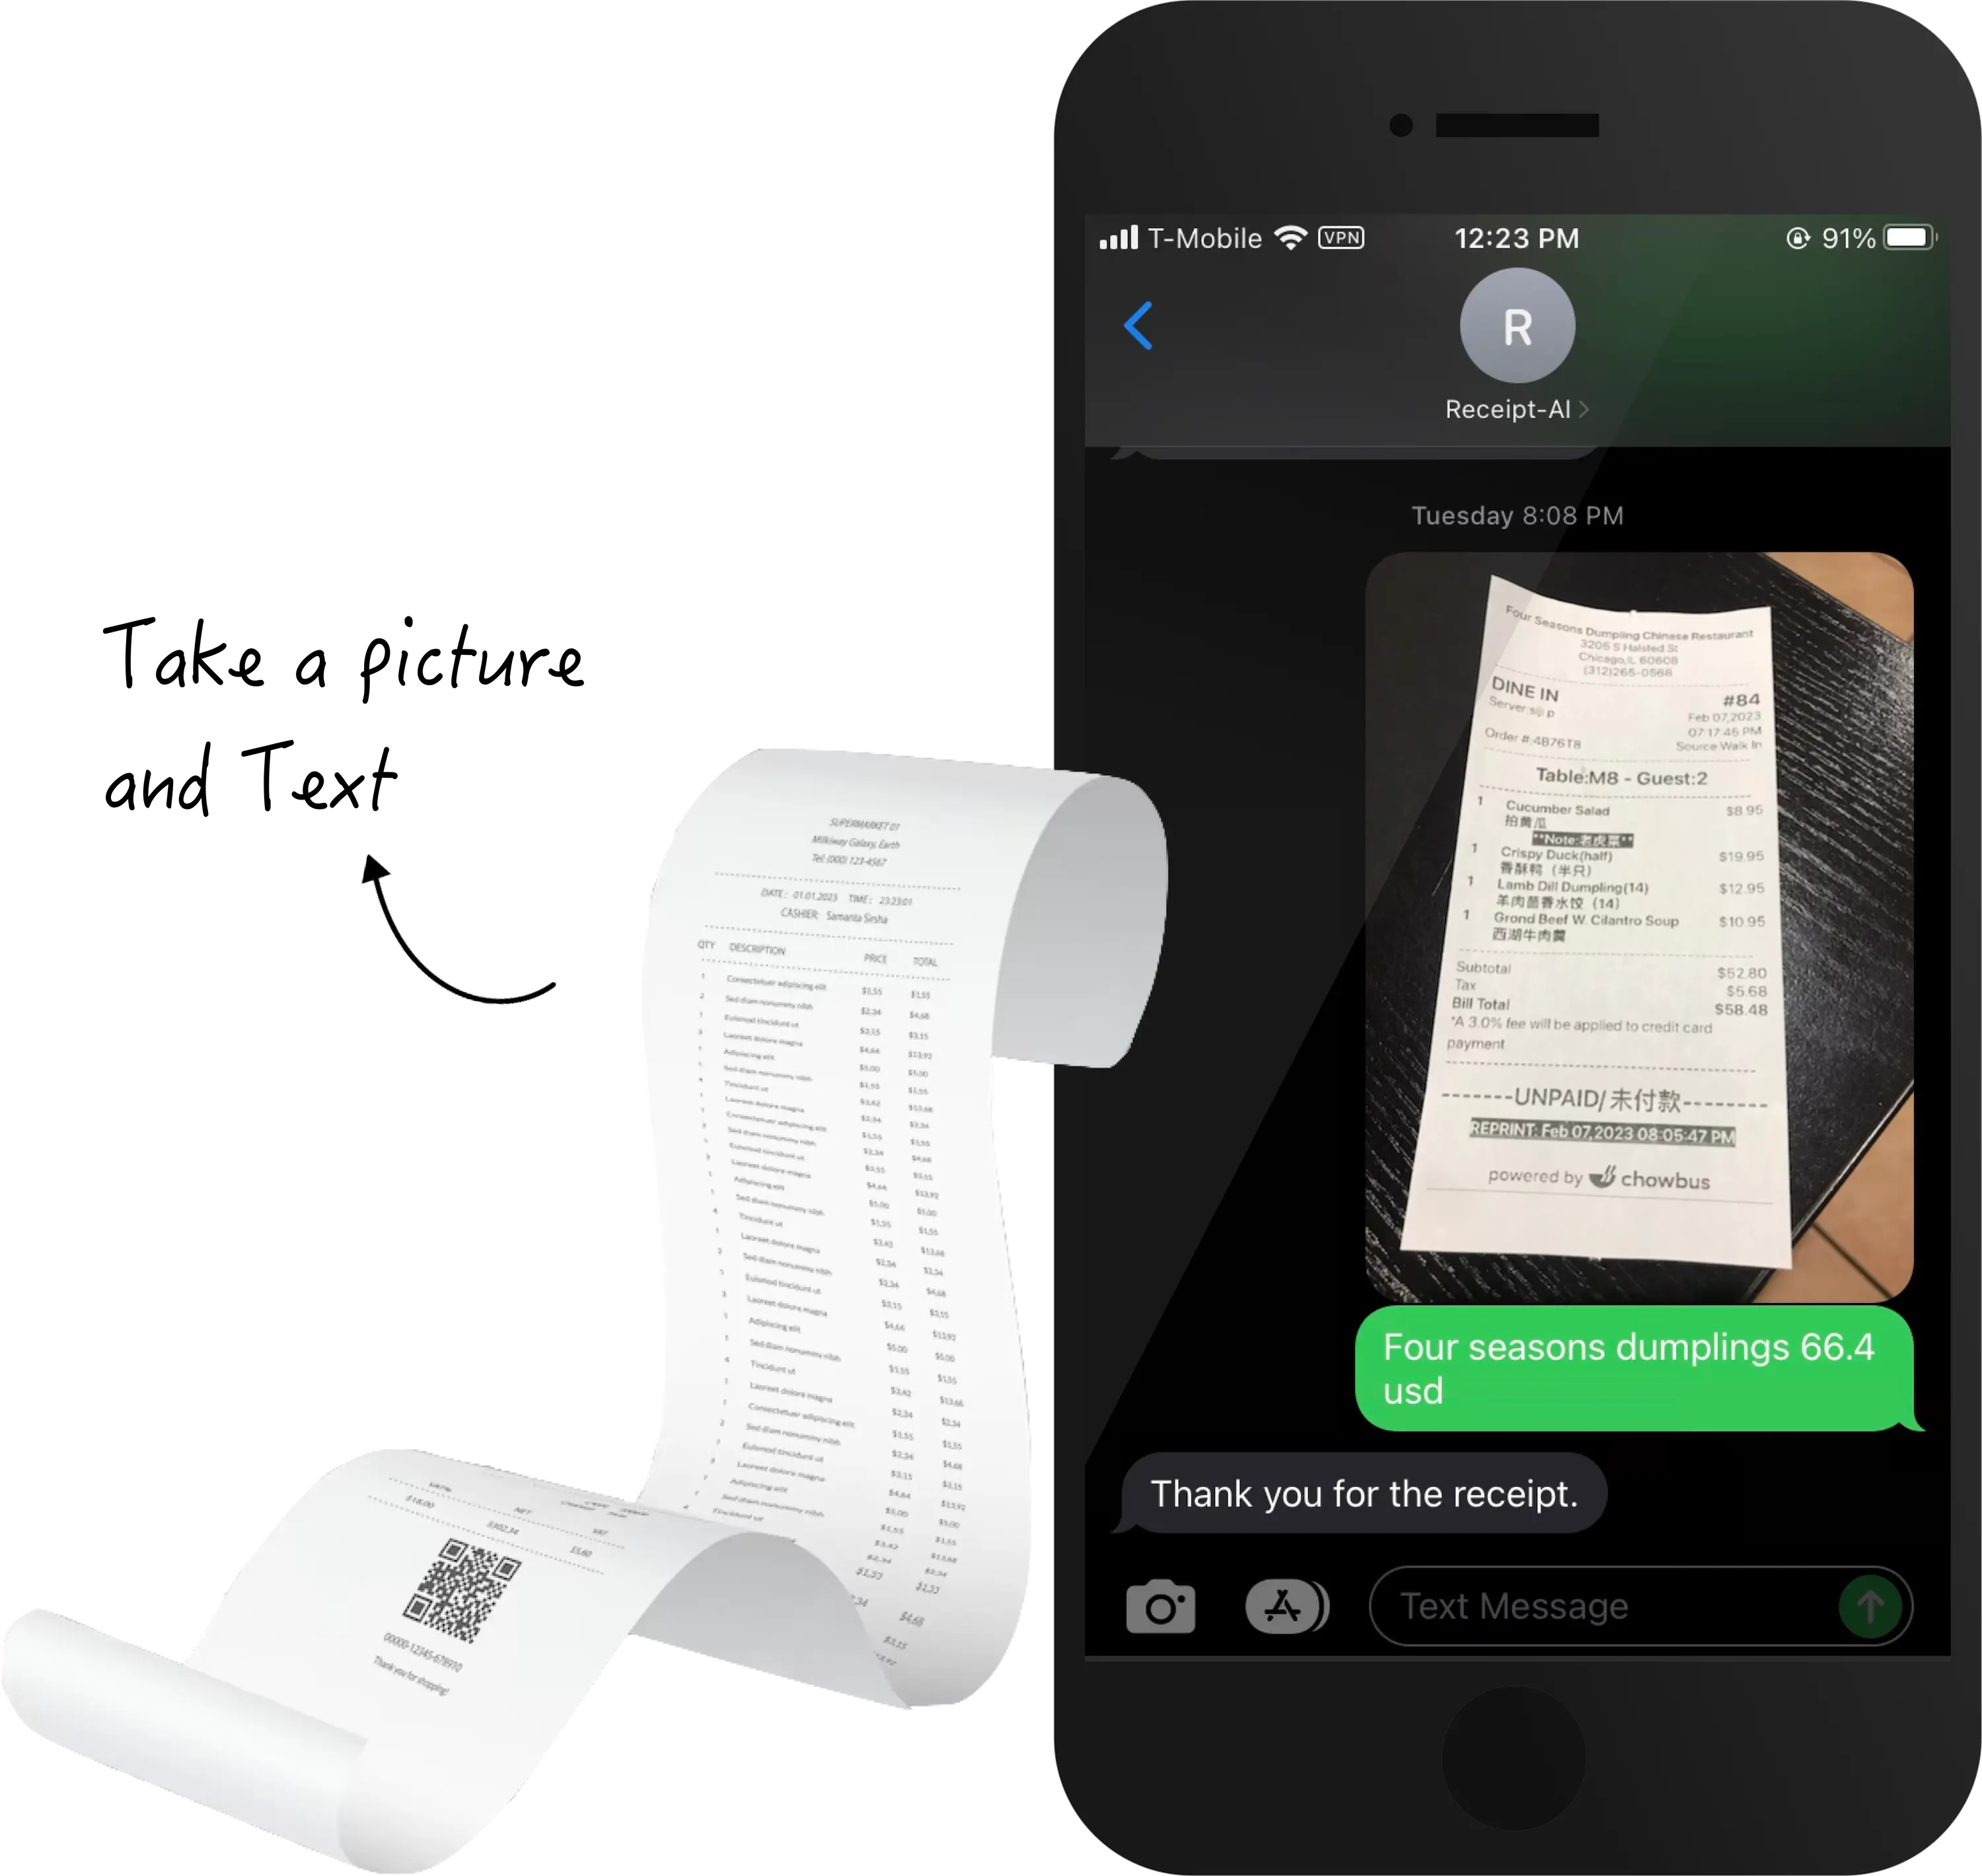 A photo of a receipt displayed on a phone screen is sent to Receipt-AI using SMS, and the AI responds with a message -"Thank you for the receipt."